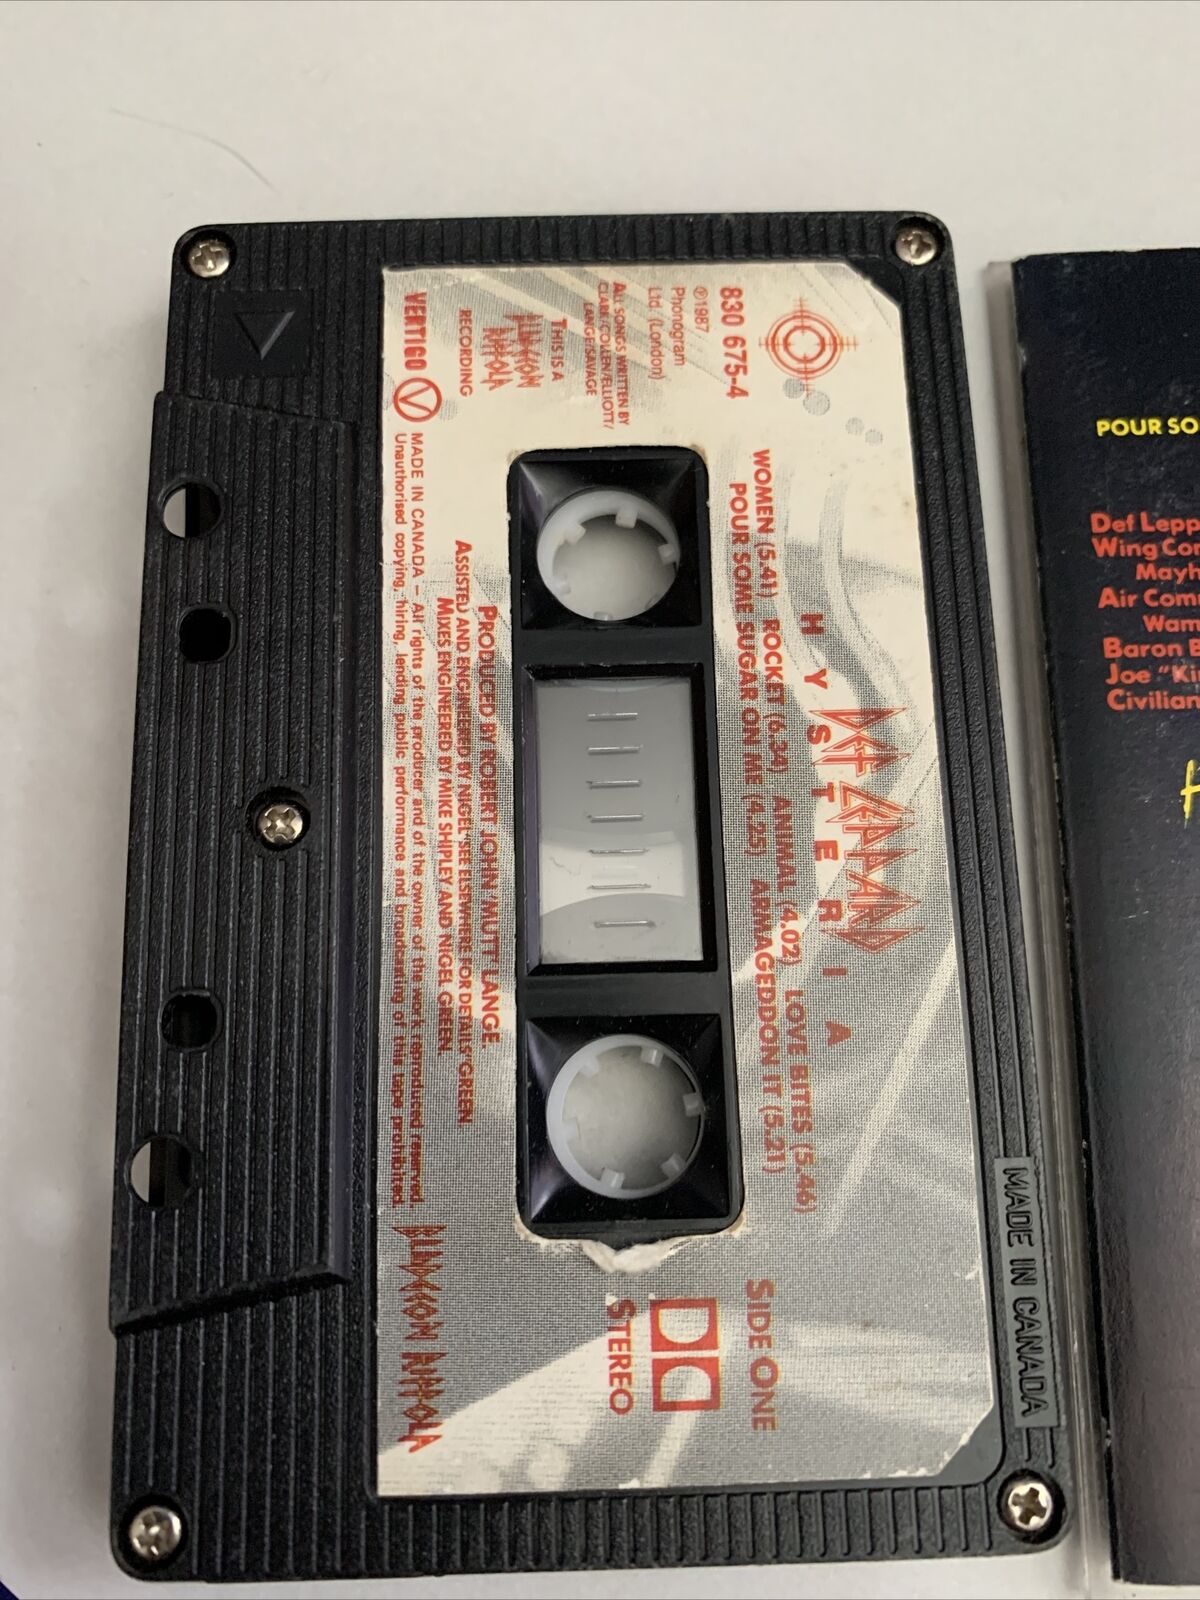 Hysteria by Def Leppard (Cassette)